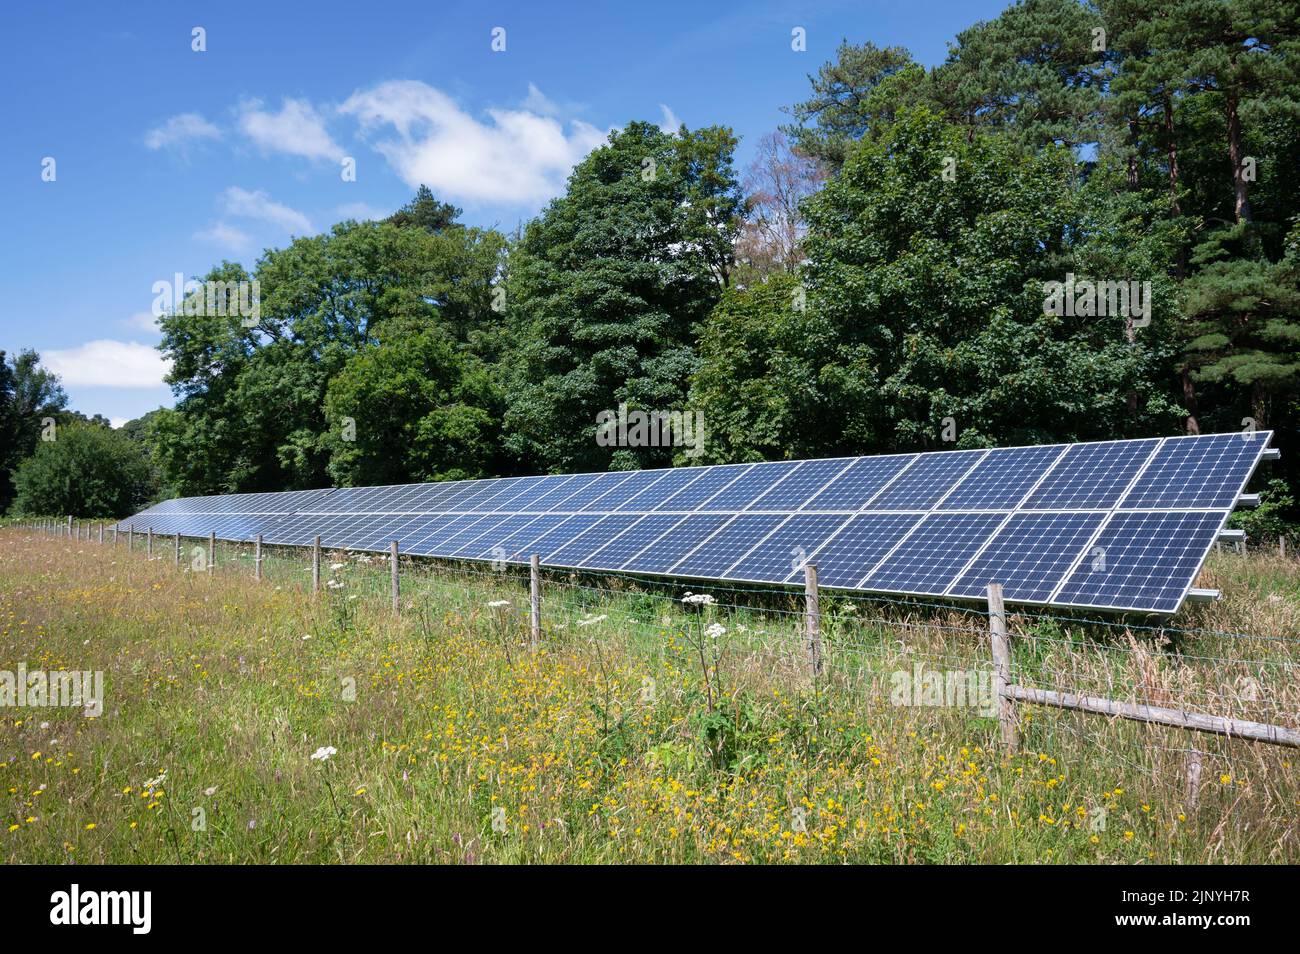 A row of solar panels installed in a rural field in the United Kingdom Stock Photo